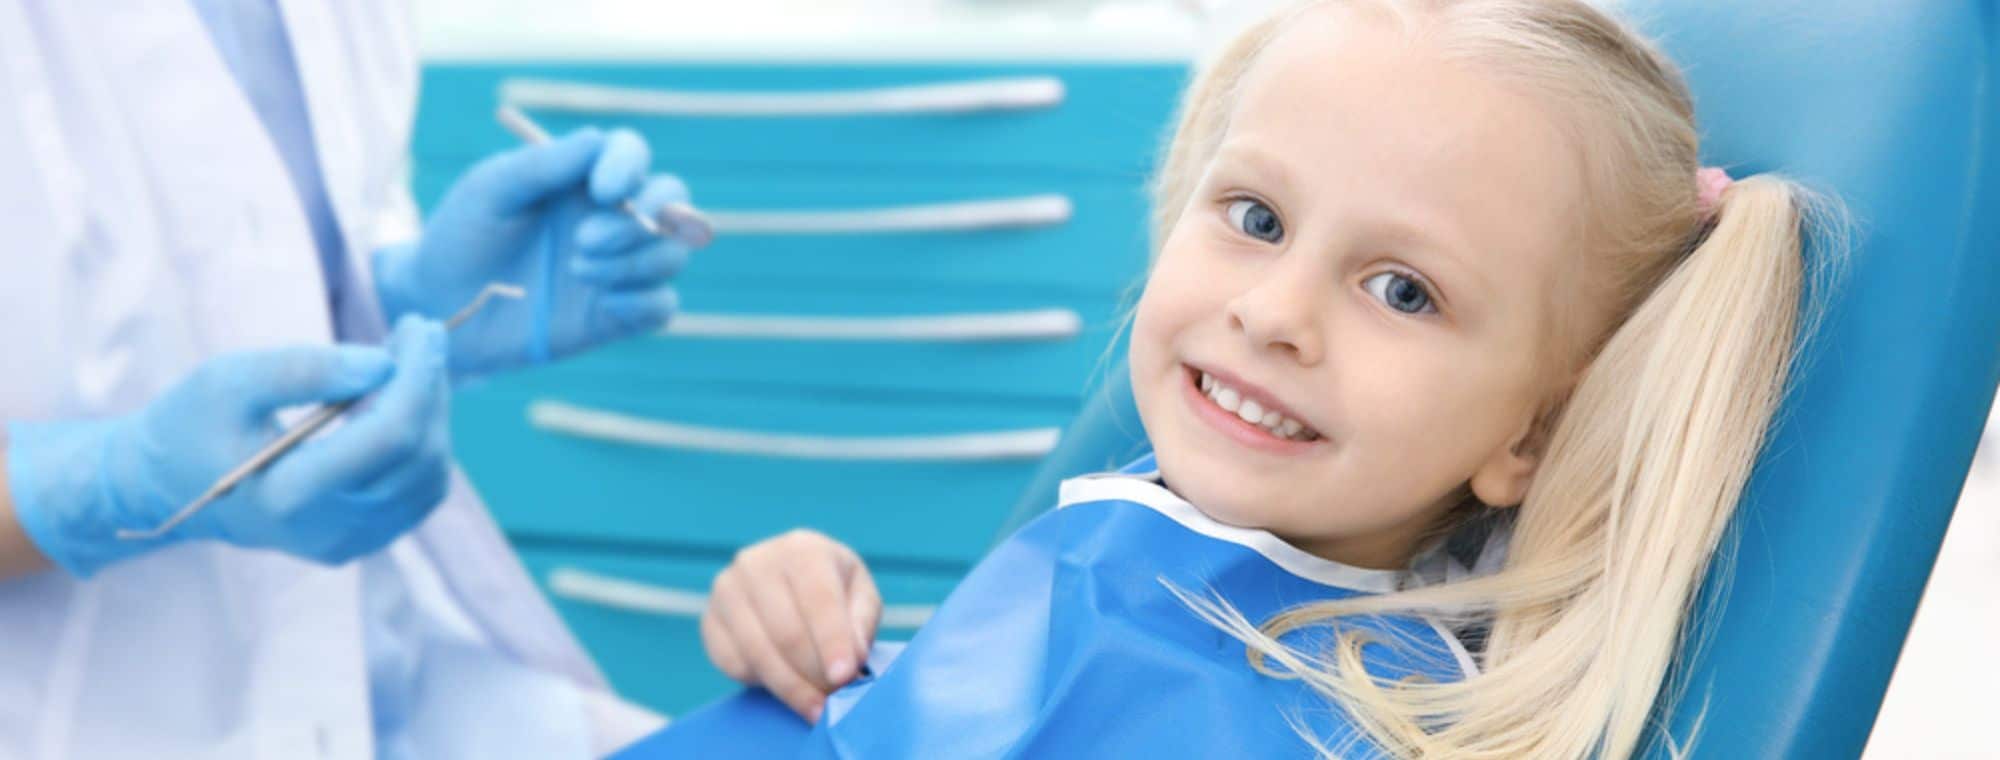 Oral Health for Children – FAQs by Parents and Carers Answered